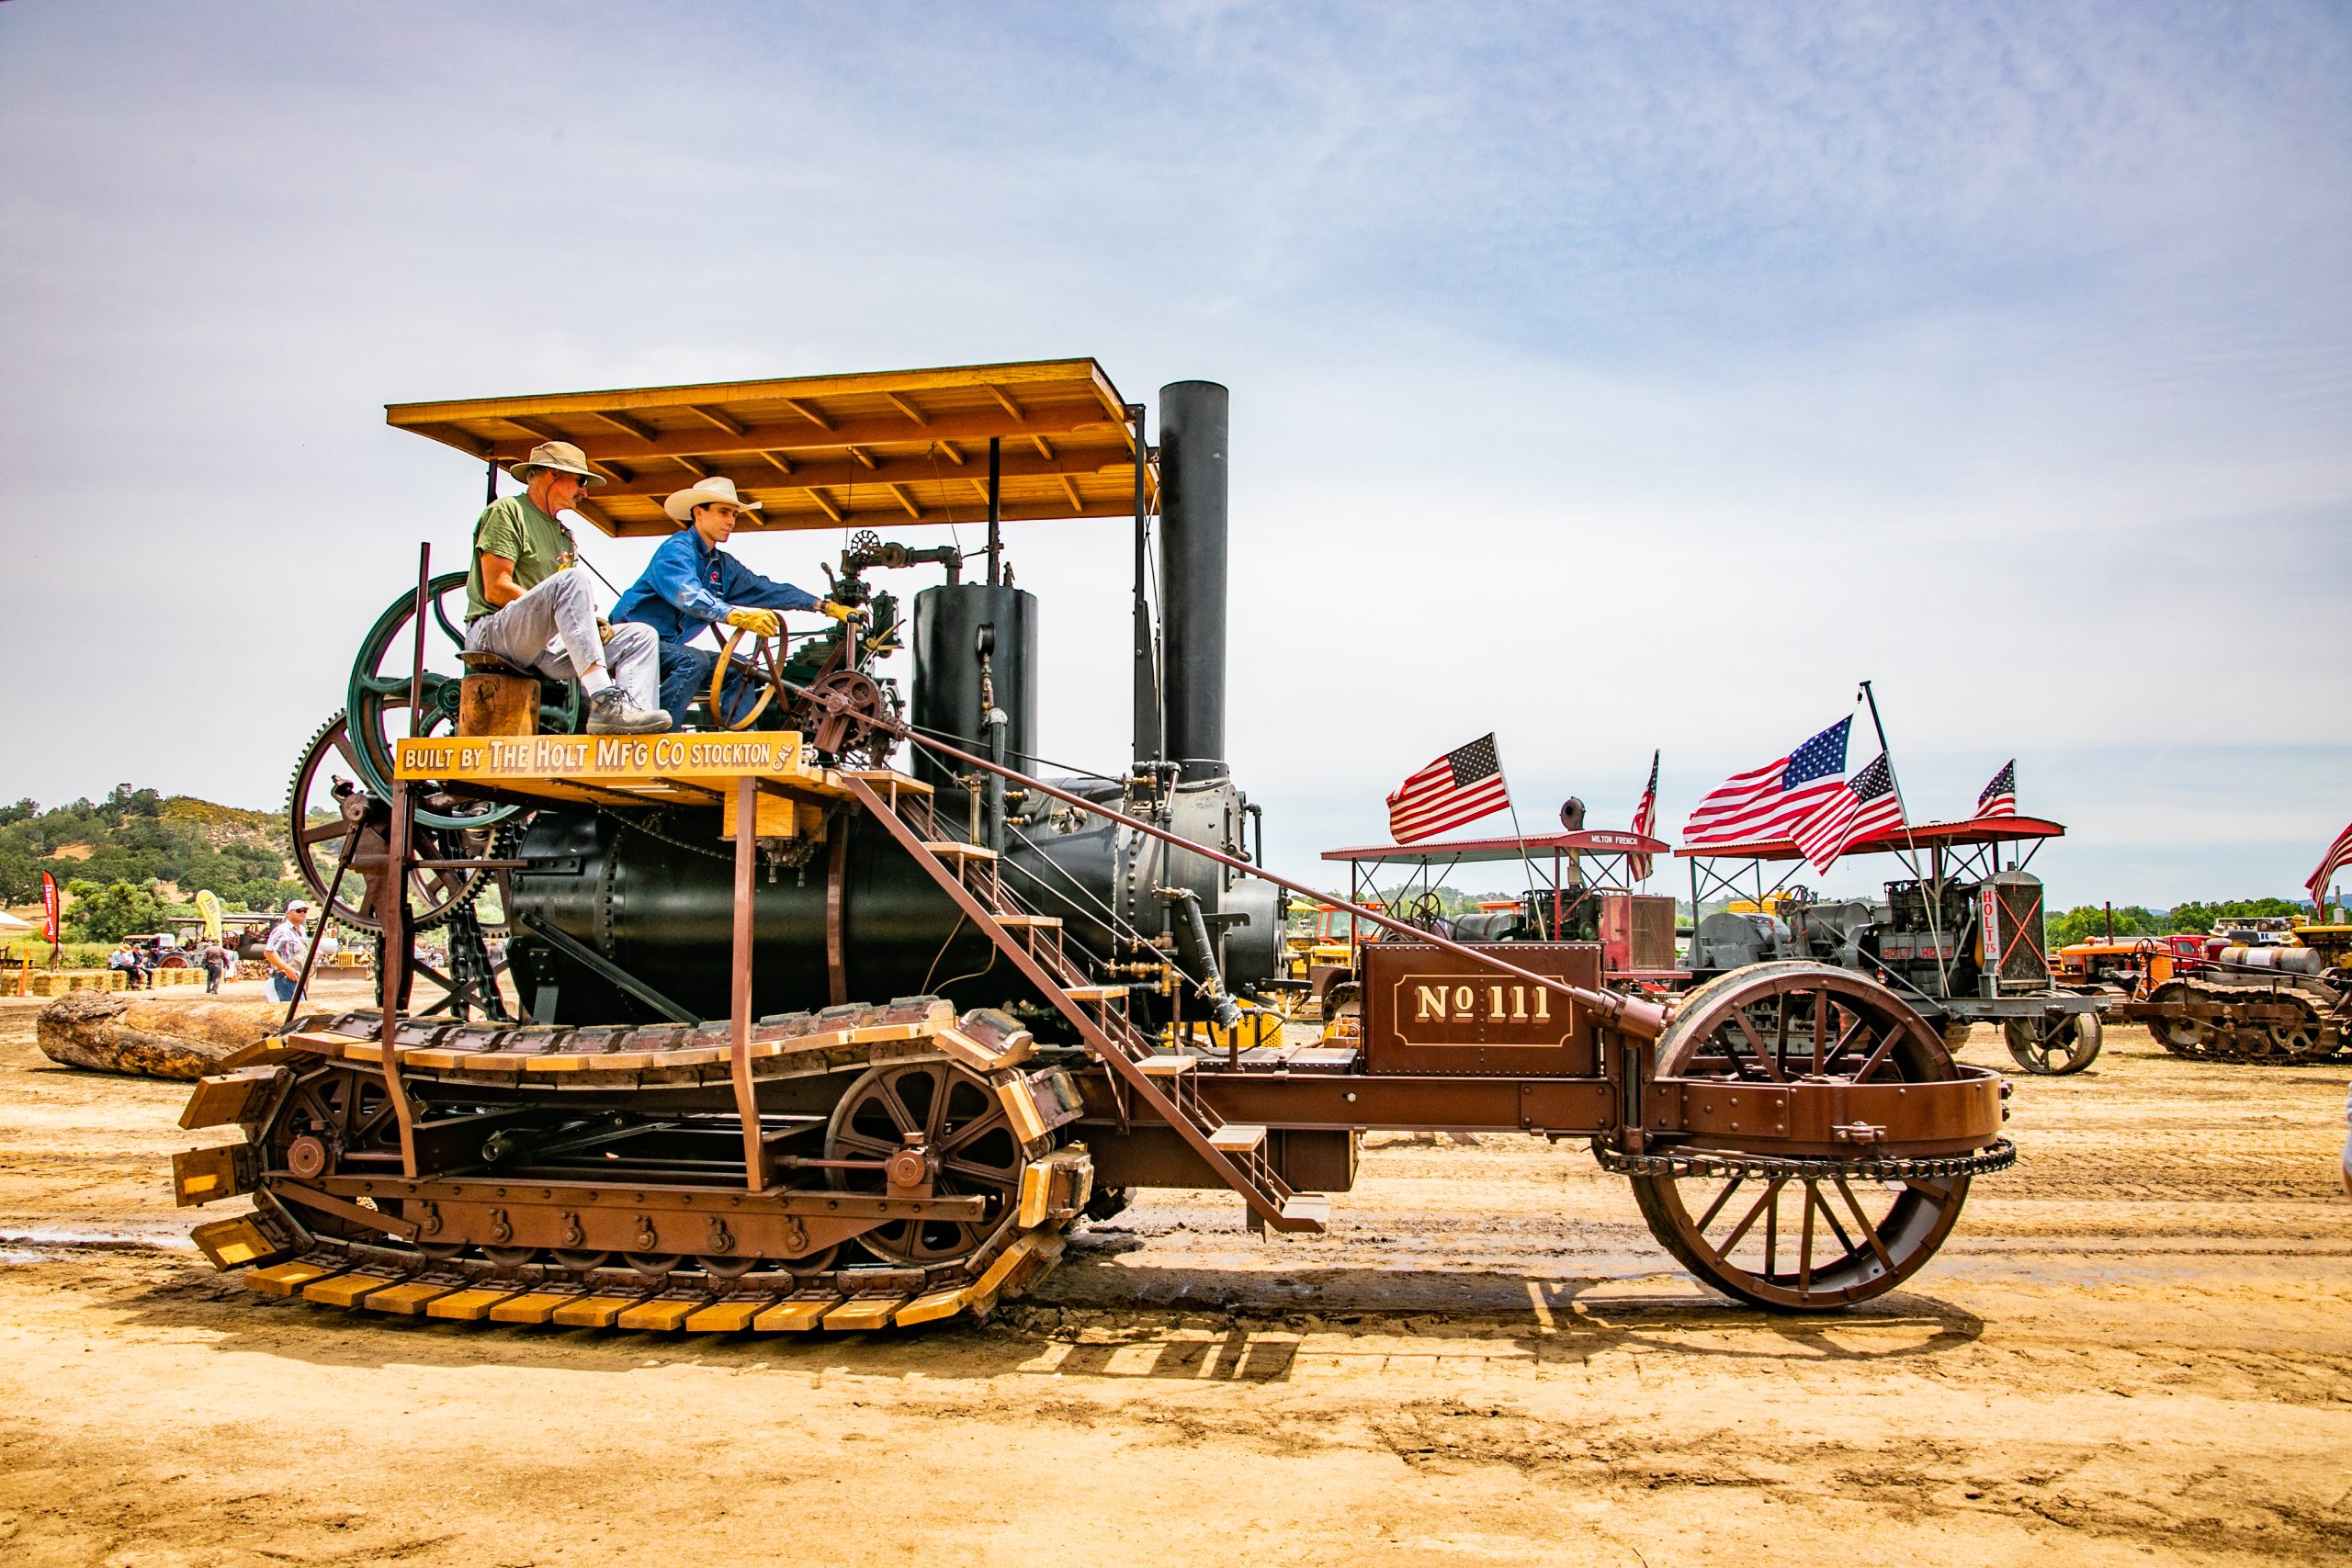 Best of the West Antique Equipment Show Returns • Paso Robles Press